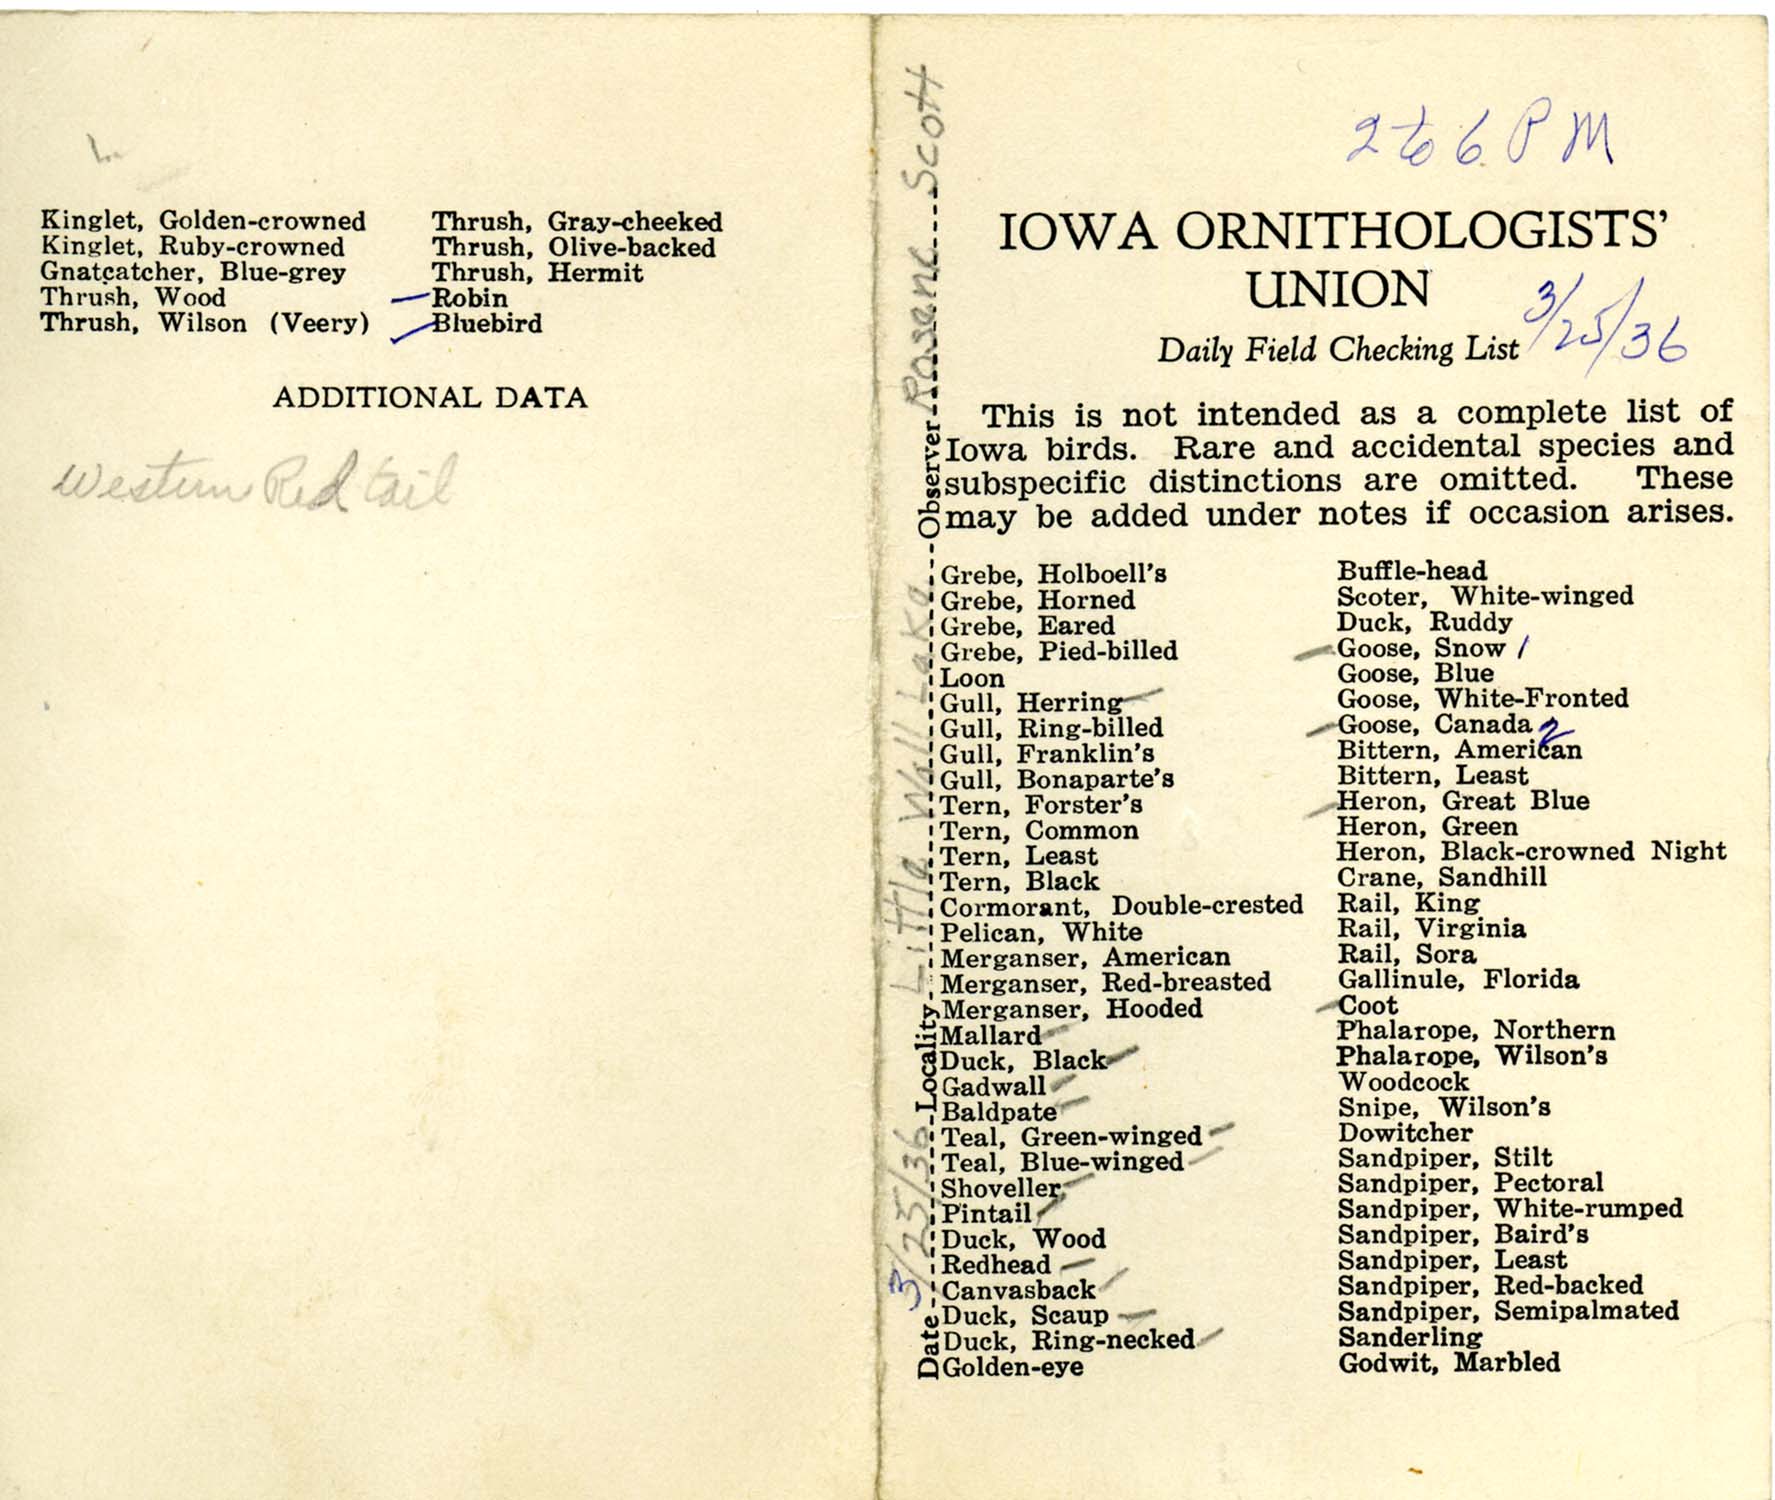 Daily field checking list by Walter Rosene, March 25, 1936